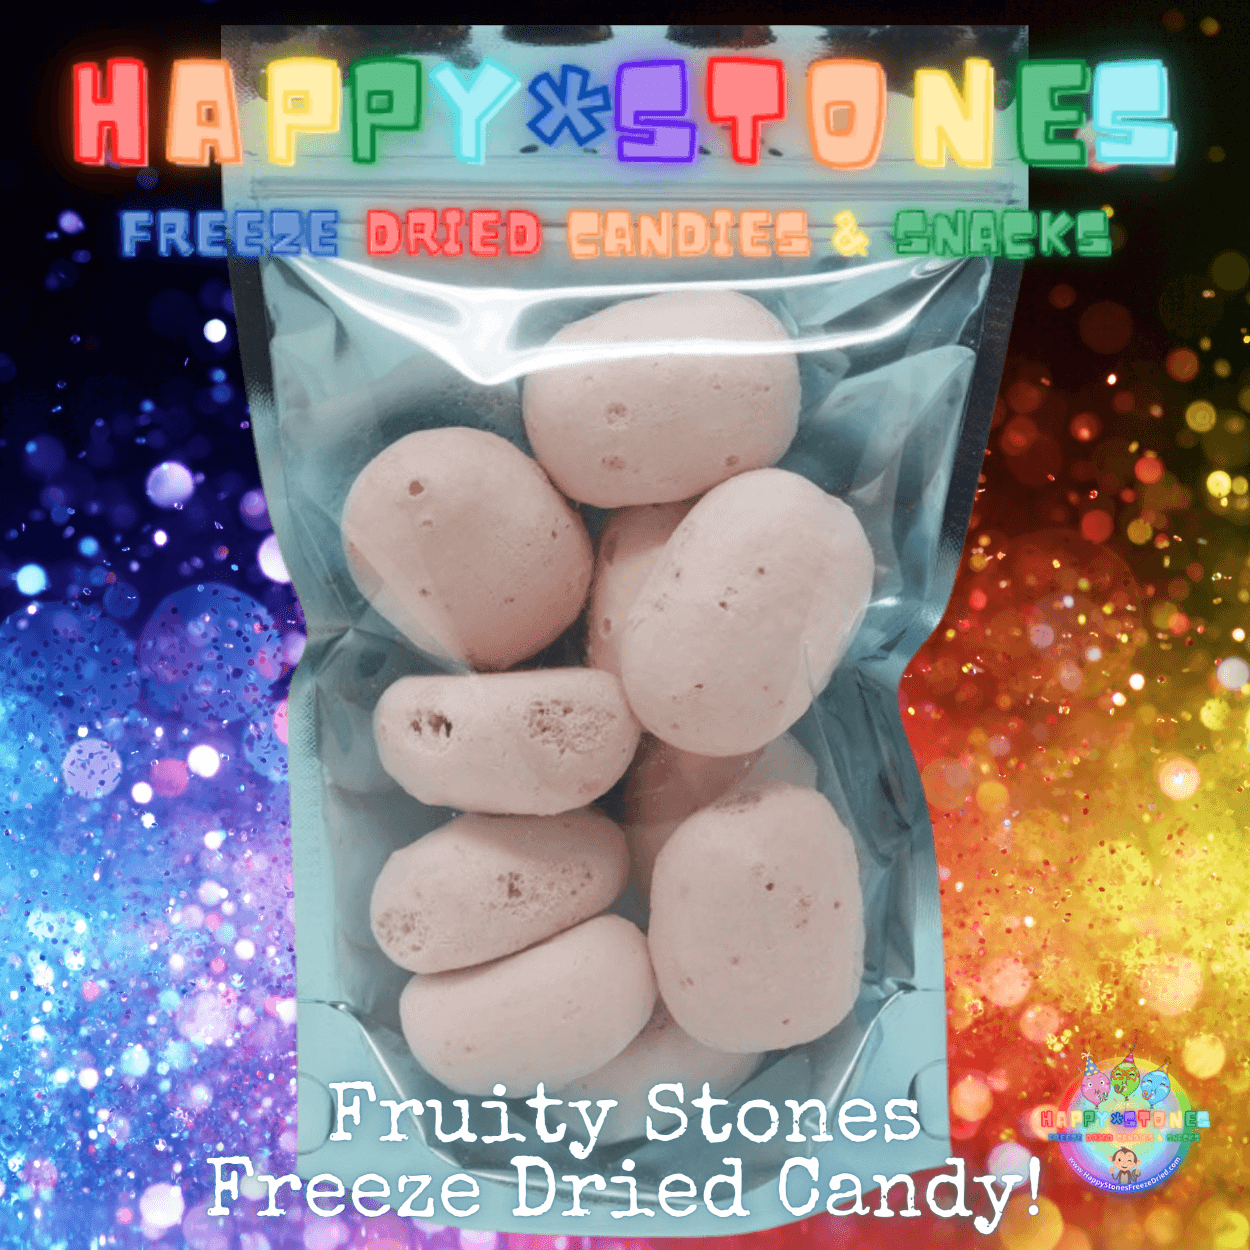 Freeze Dried Candy Fruity Stones Sharing Bag